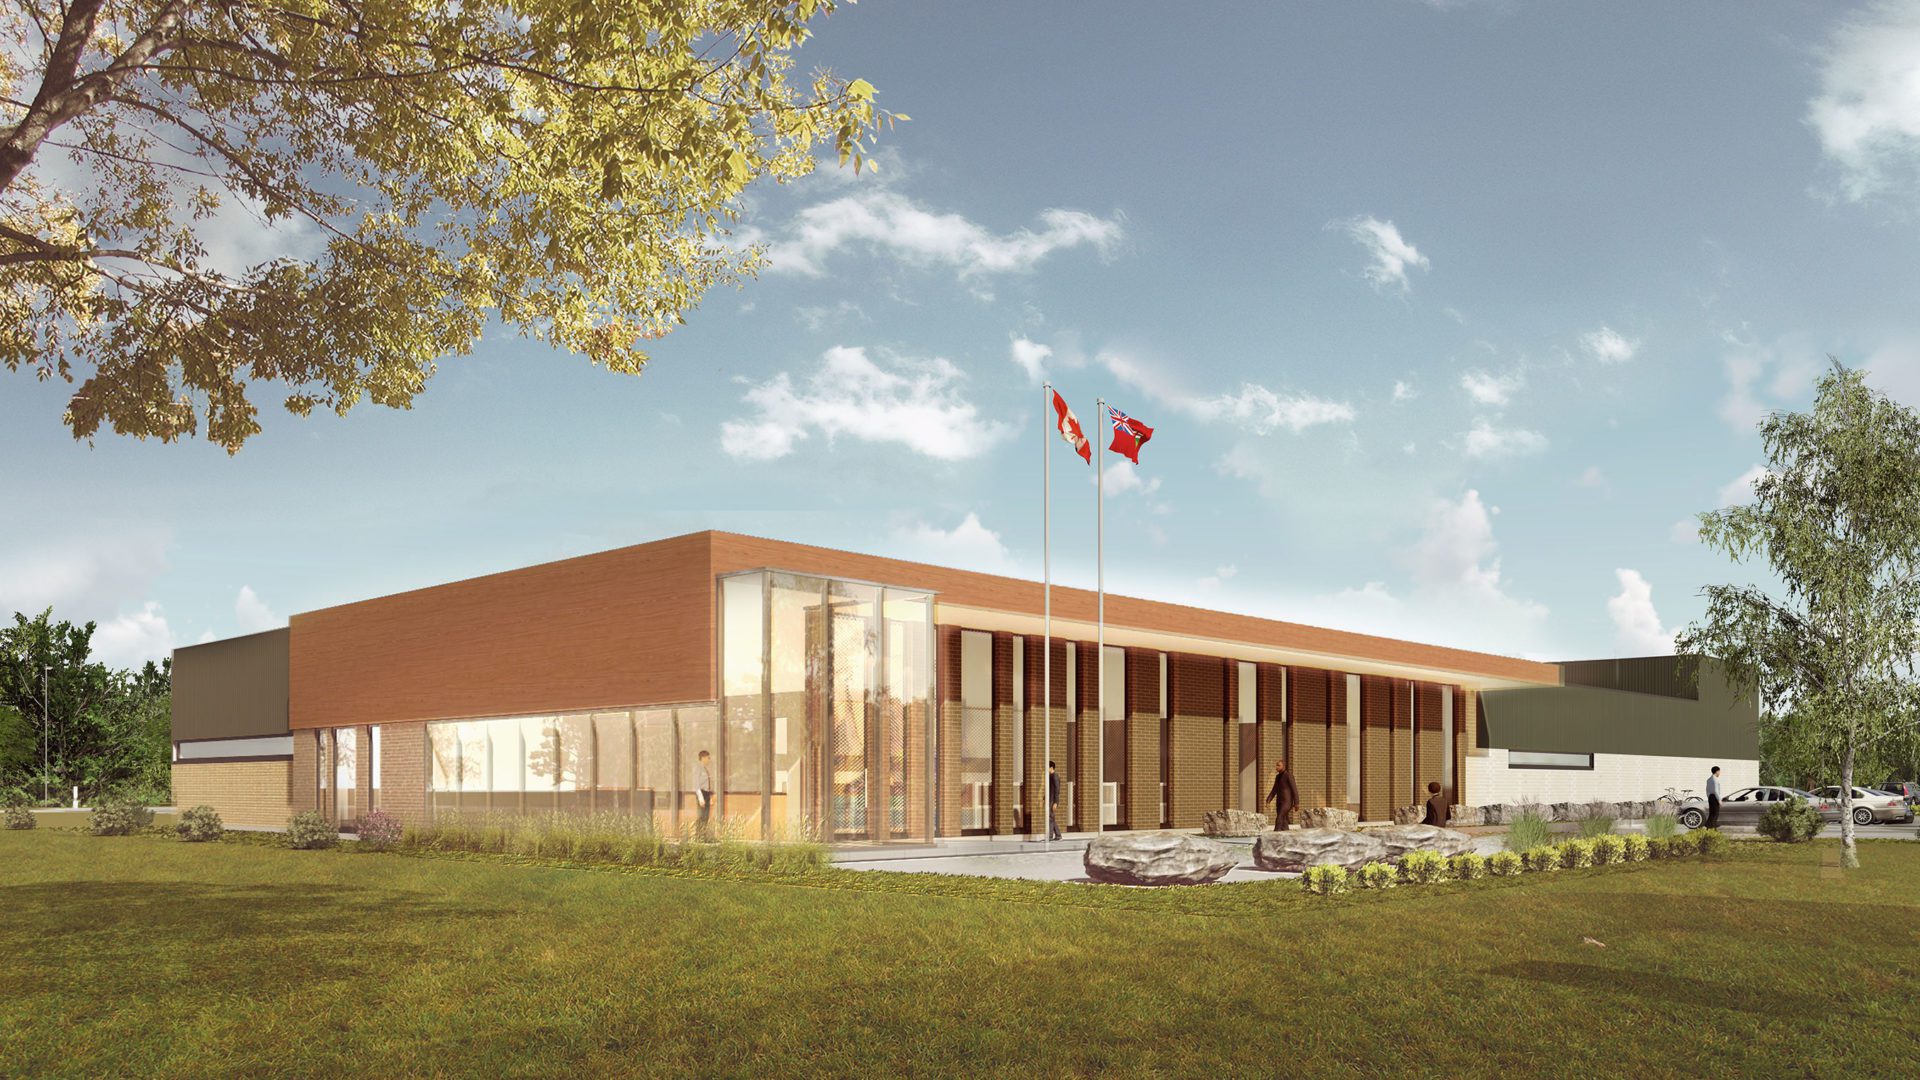 side view of OPP detachment facility building exterior in hawkesbury ontario